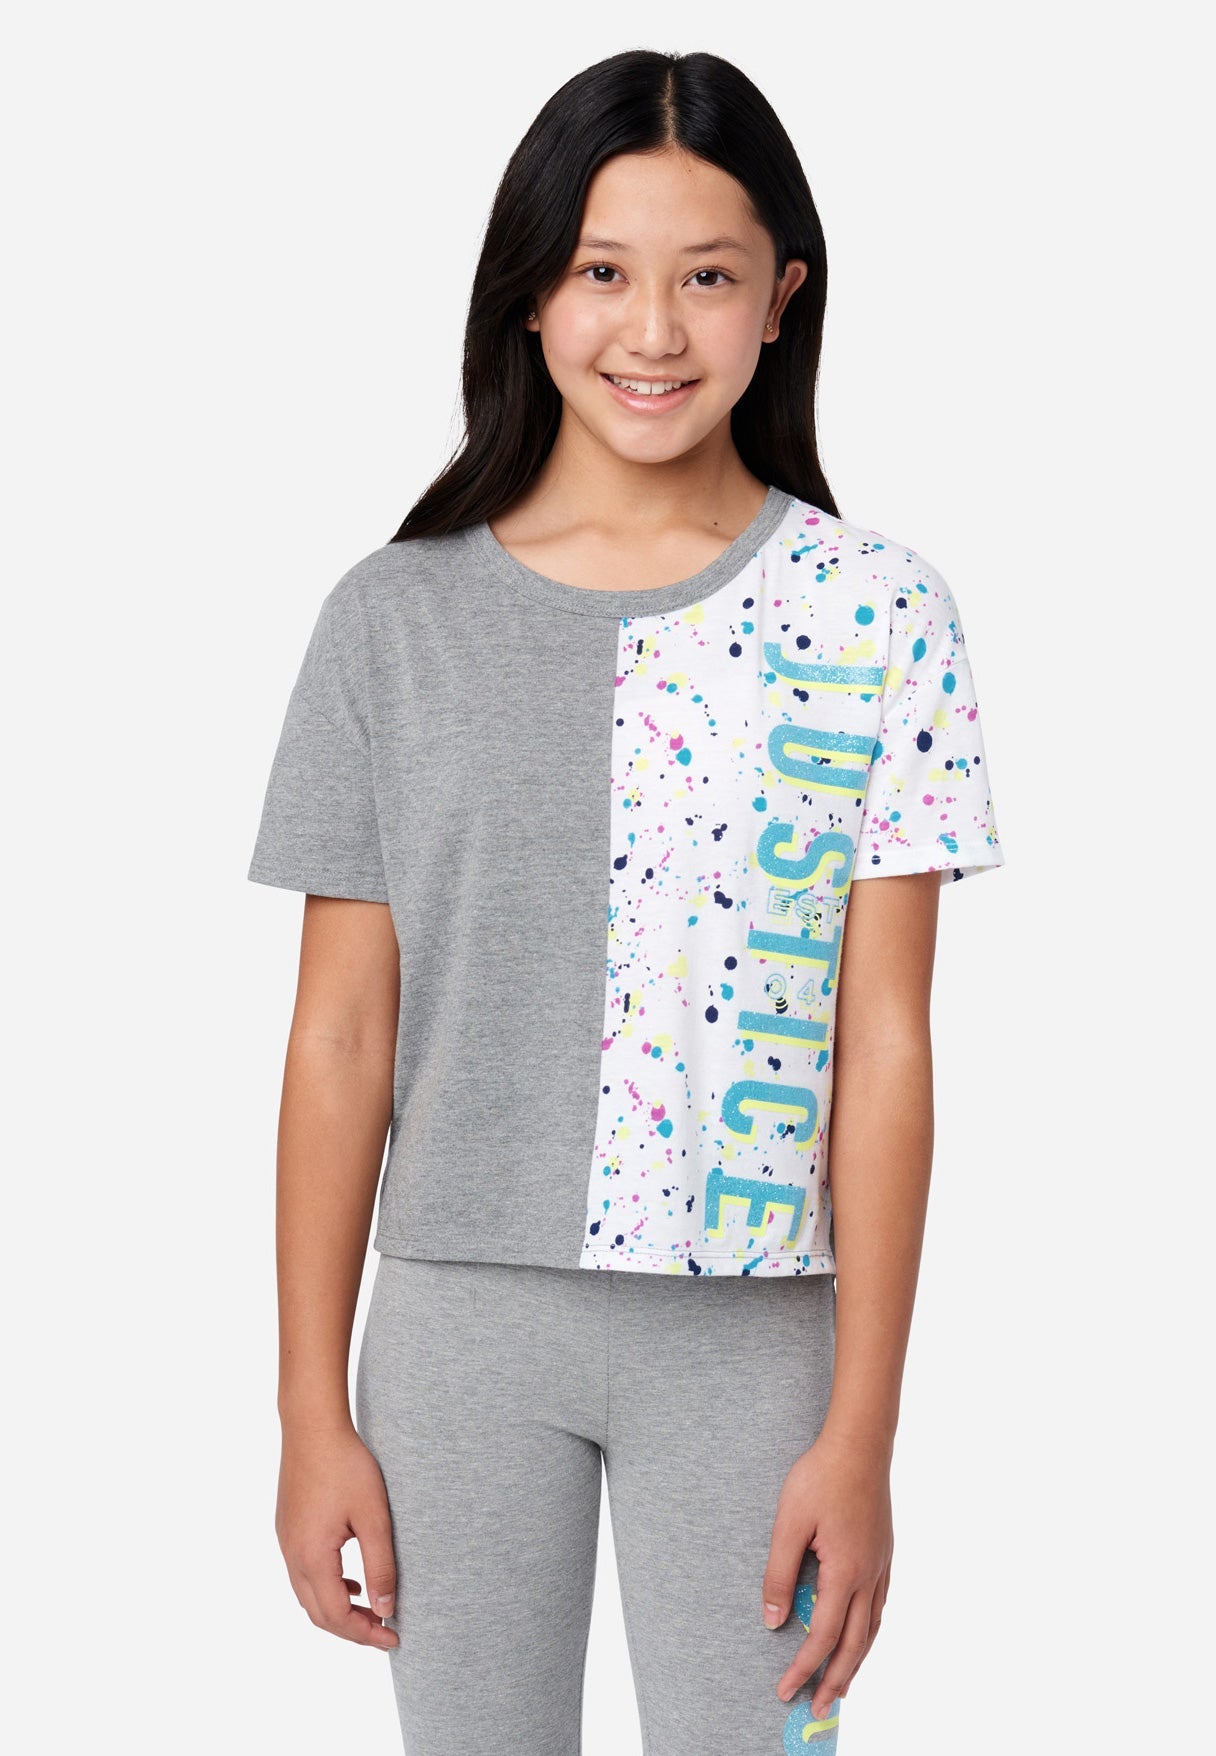 Justice Boxy Girl's Tee in Graphite Heather, Size M Plusus (10 Plus)